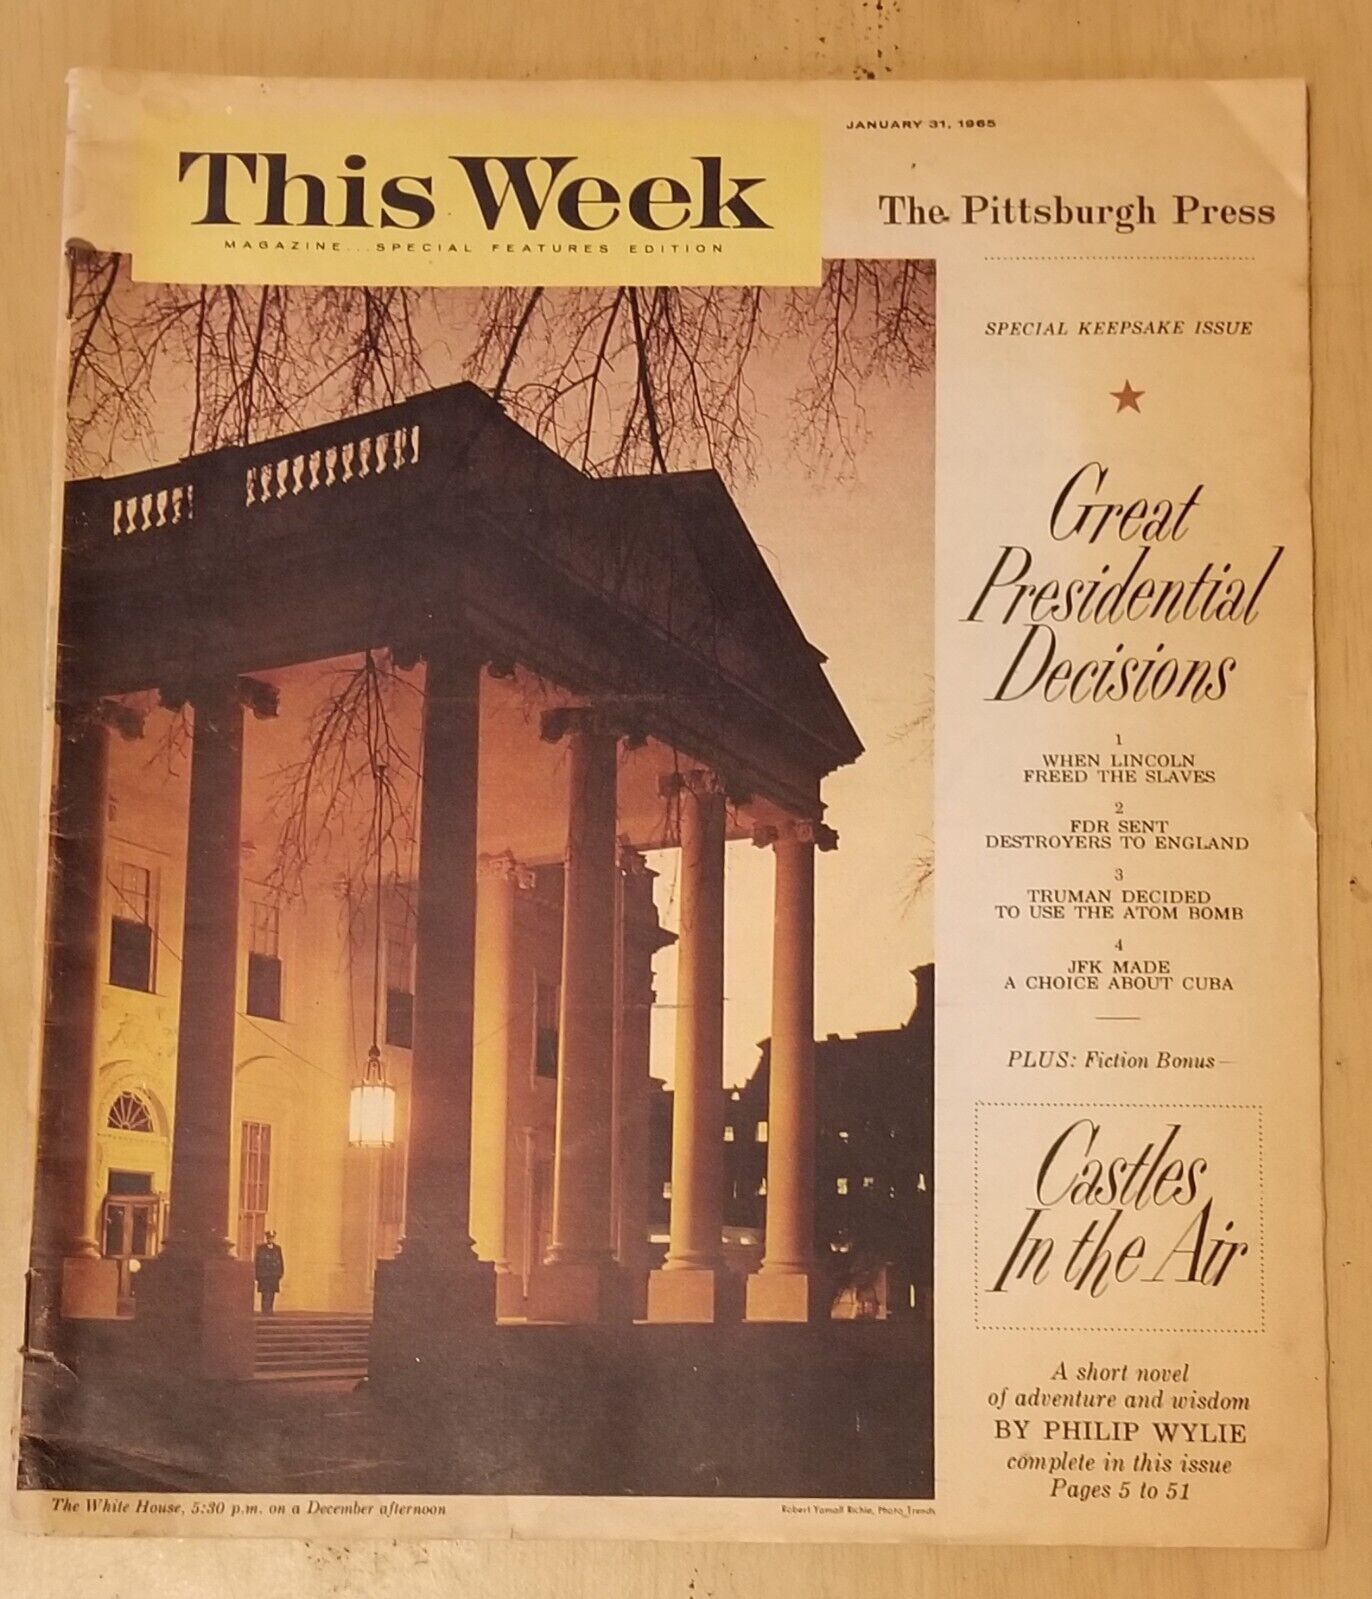 The Pittsburgh Press This Week Magazine Special Features Edition Jan 31 1965